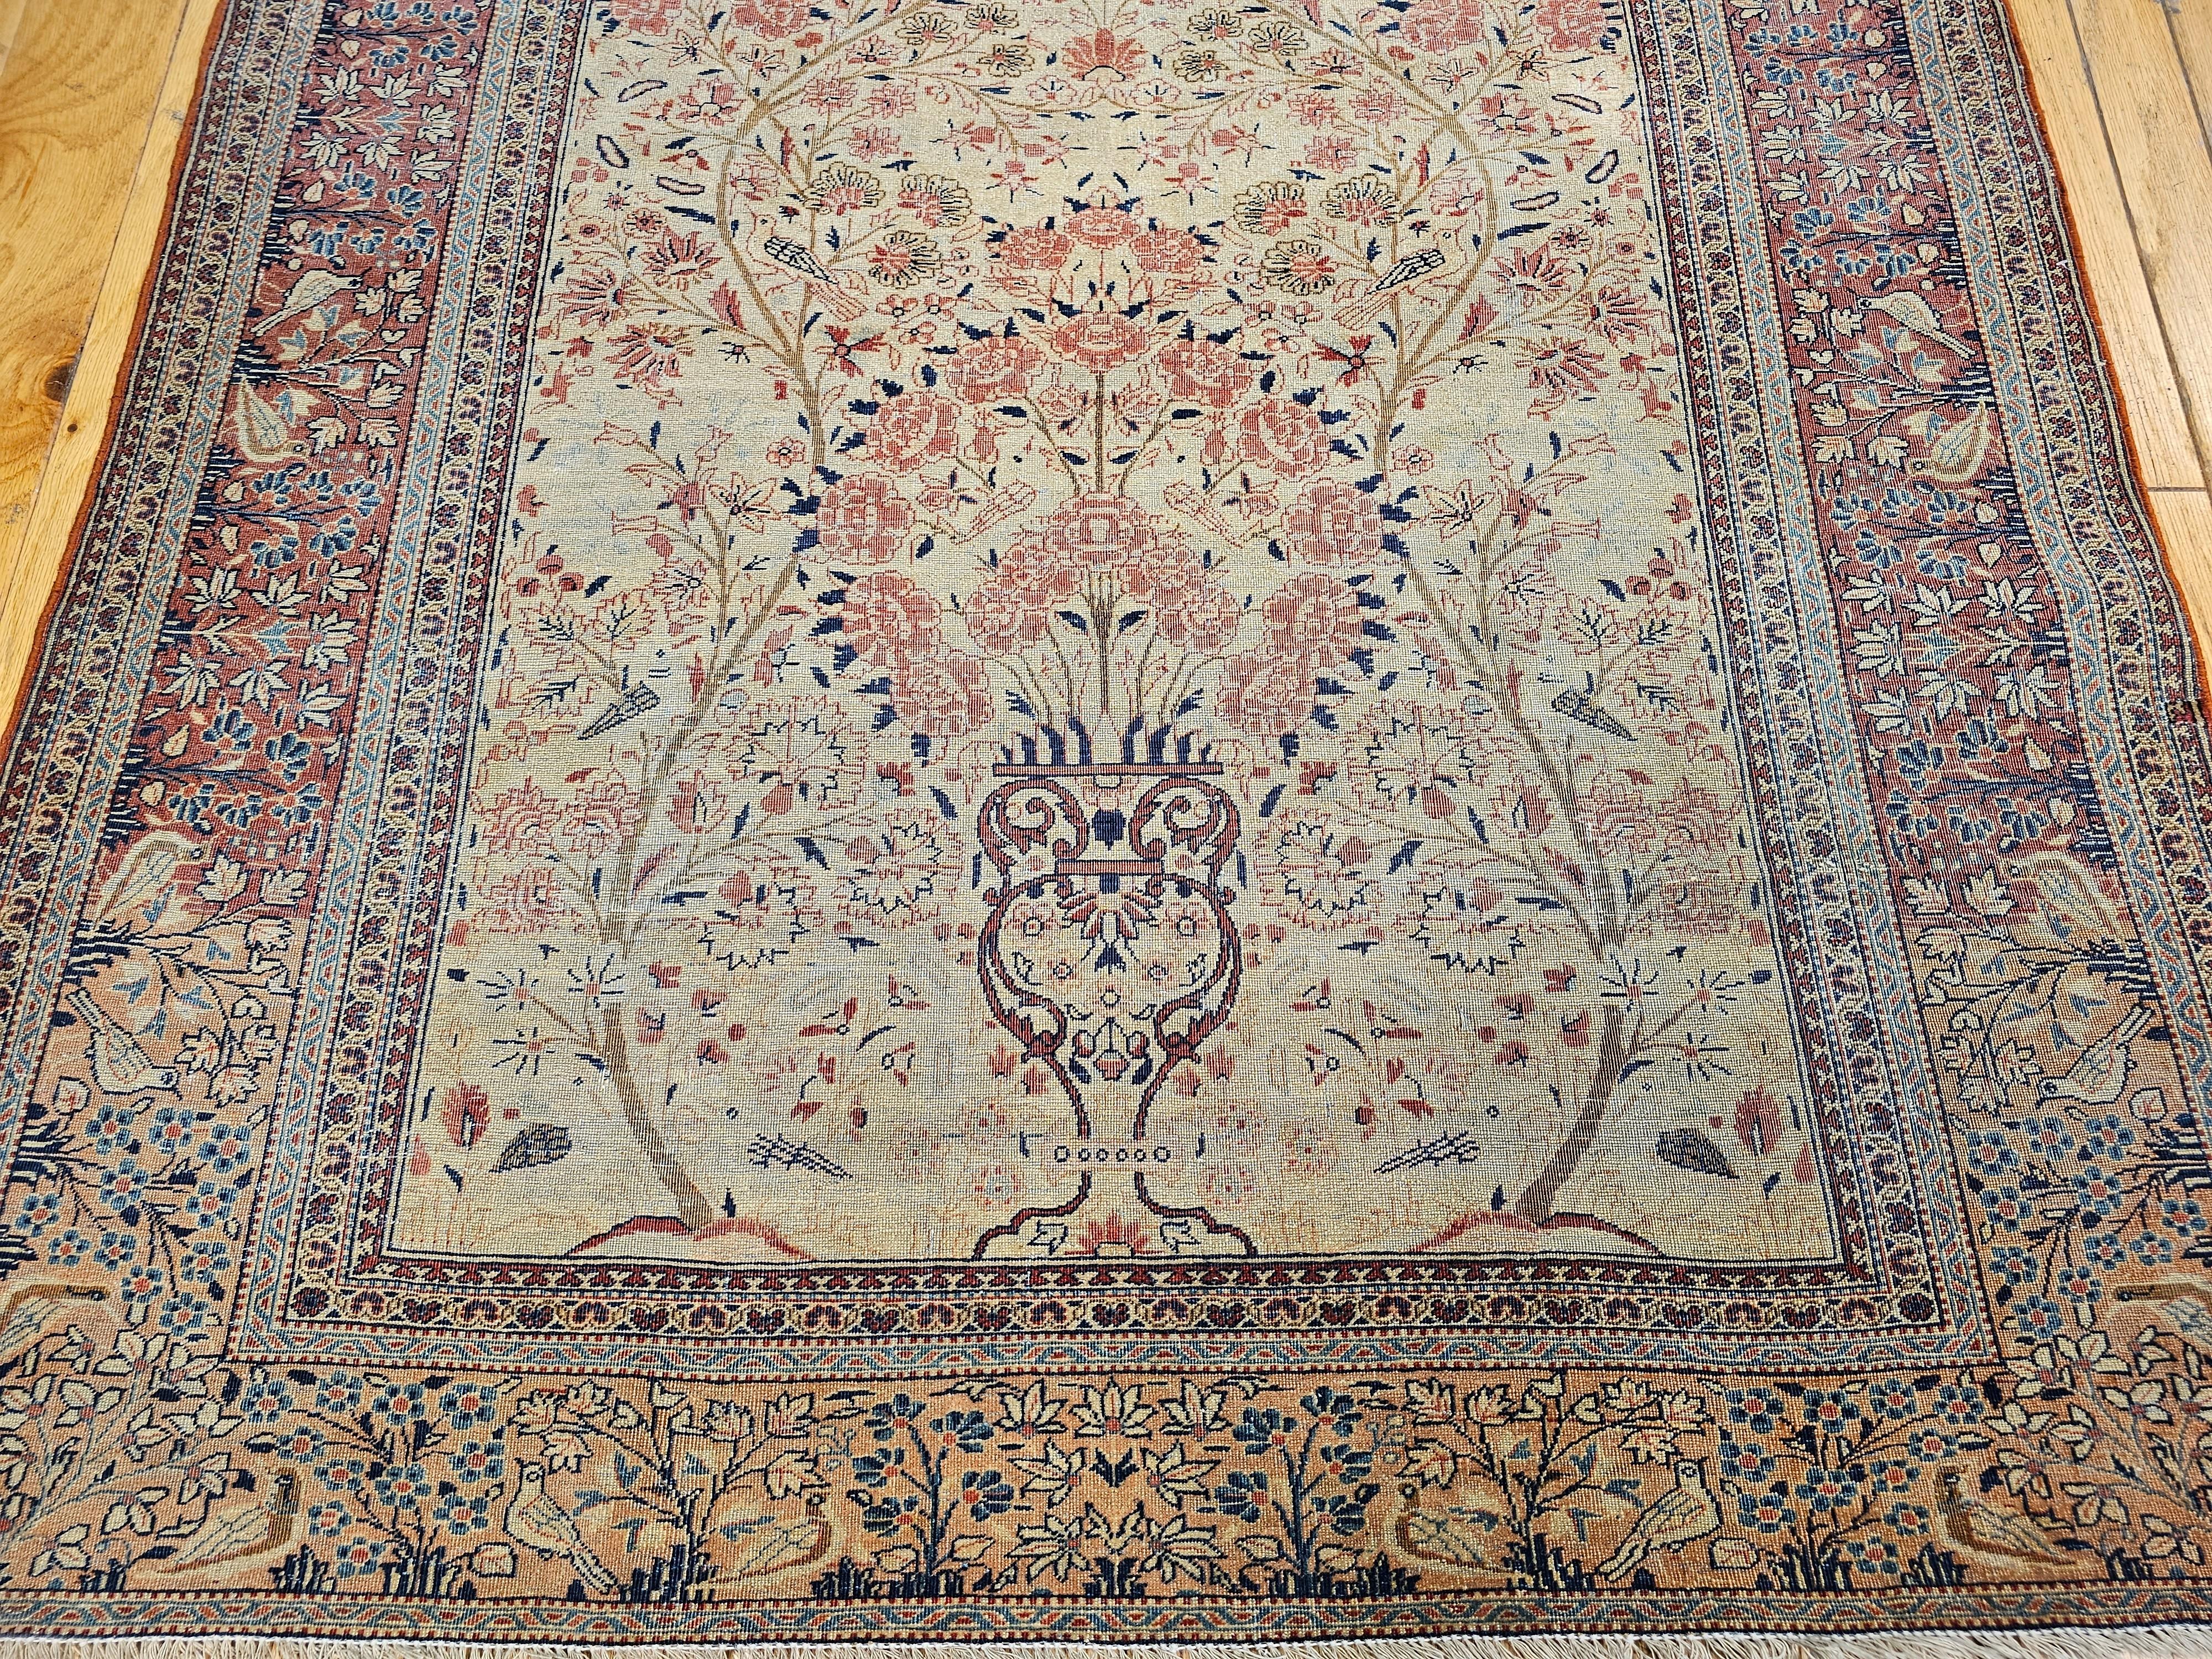 19th Century Persian Kashan Vase “Tree of Life” Rug in Ivory, Brick Red, Navy For Sale 6